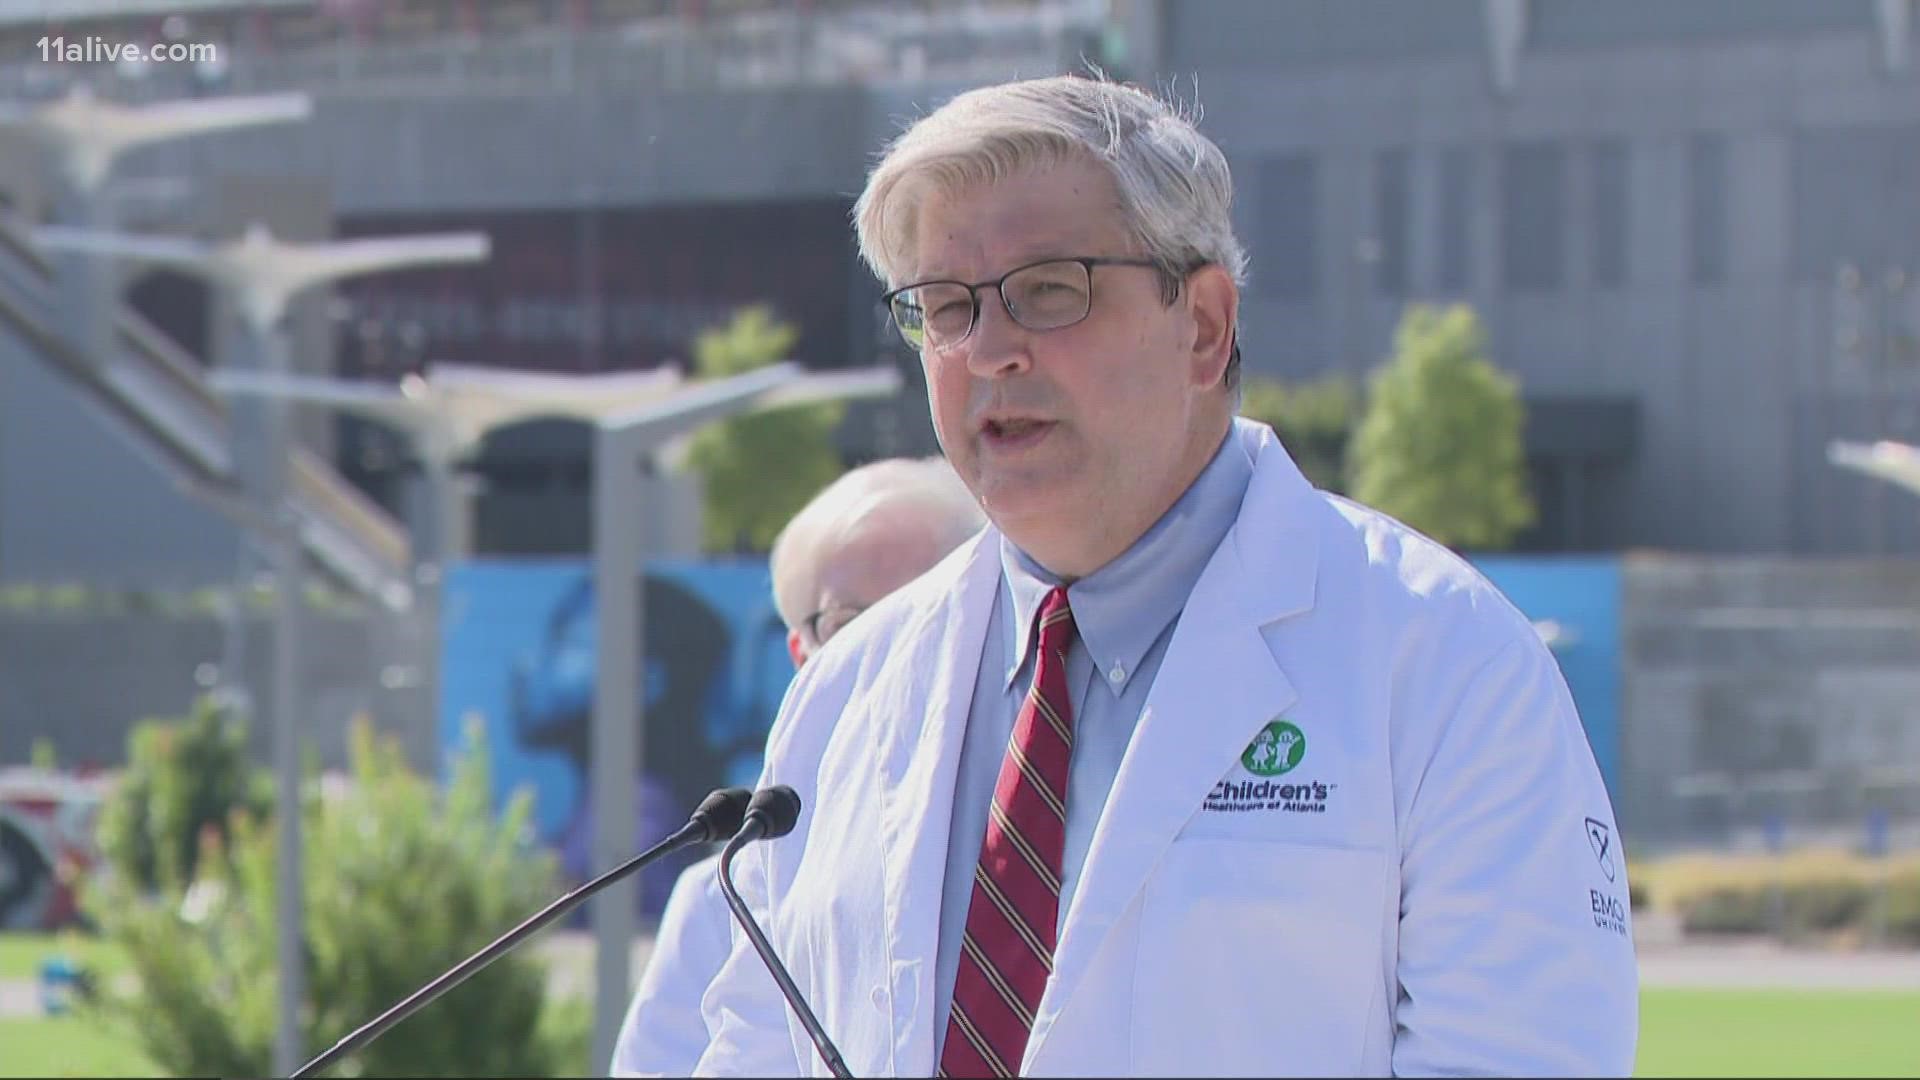 Dr. Jim Fortenberry, Chief Medical Officer with Children’s Healthcare of Atlanta speaks in an "urgent" update on the state of COVID.